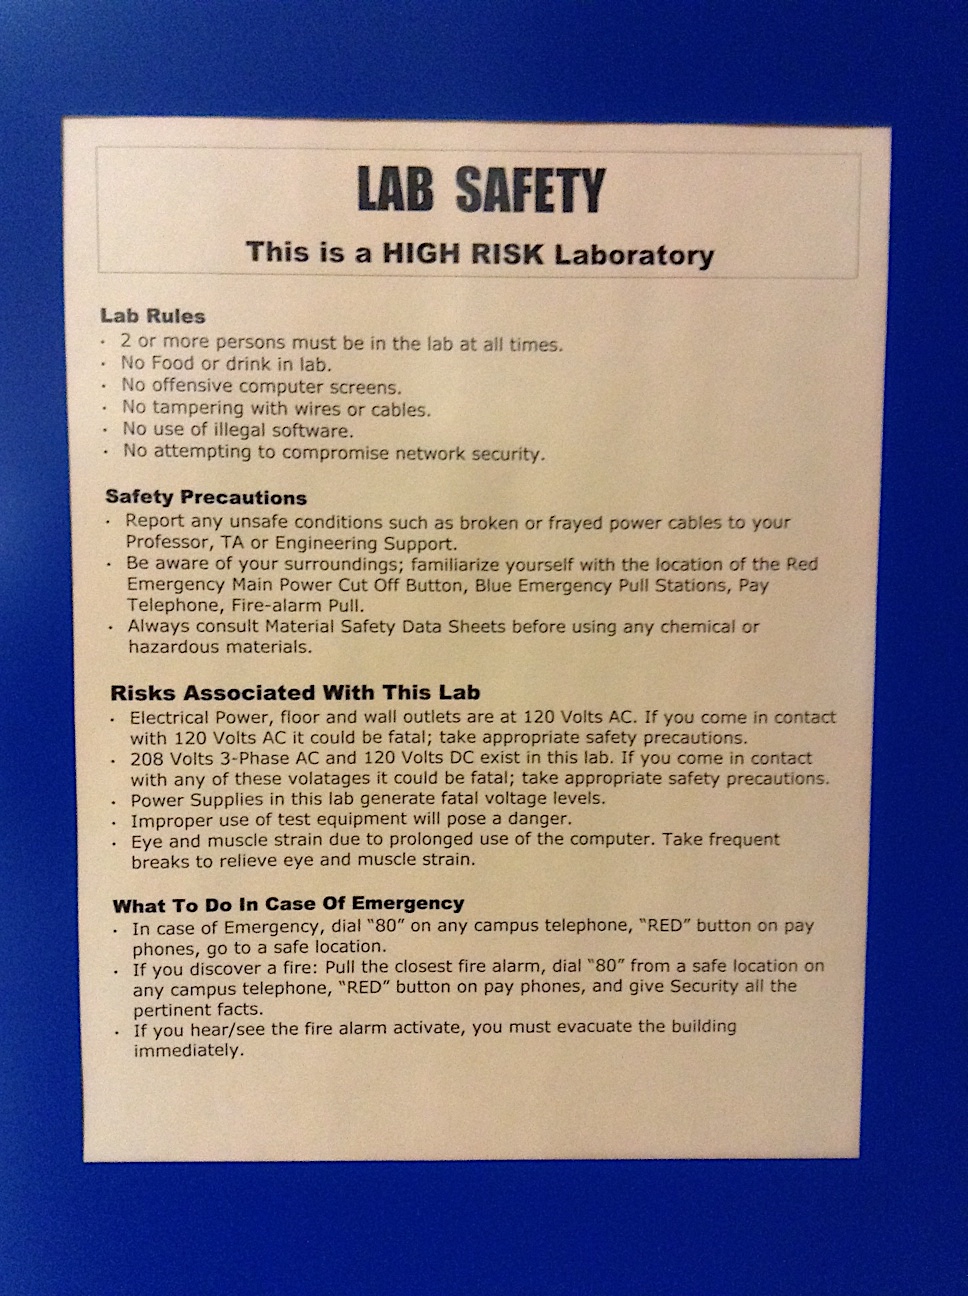 High Risk Lab Poster image (red)